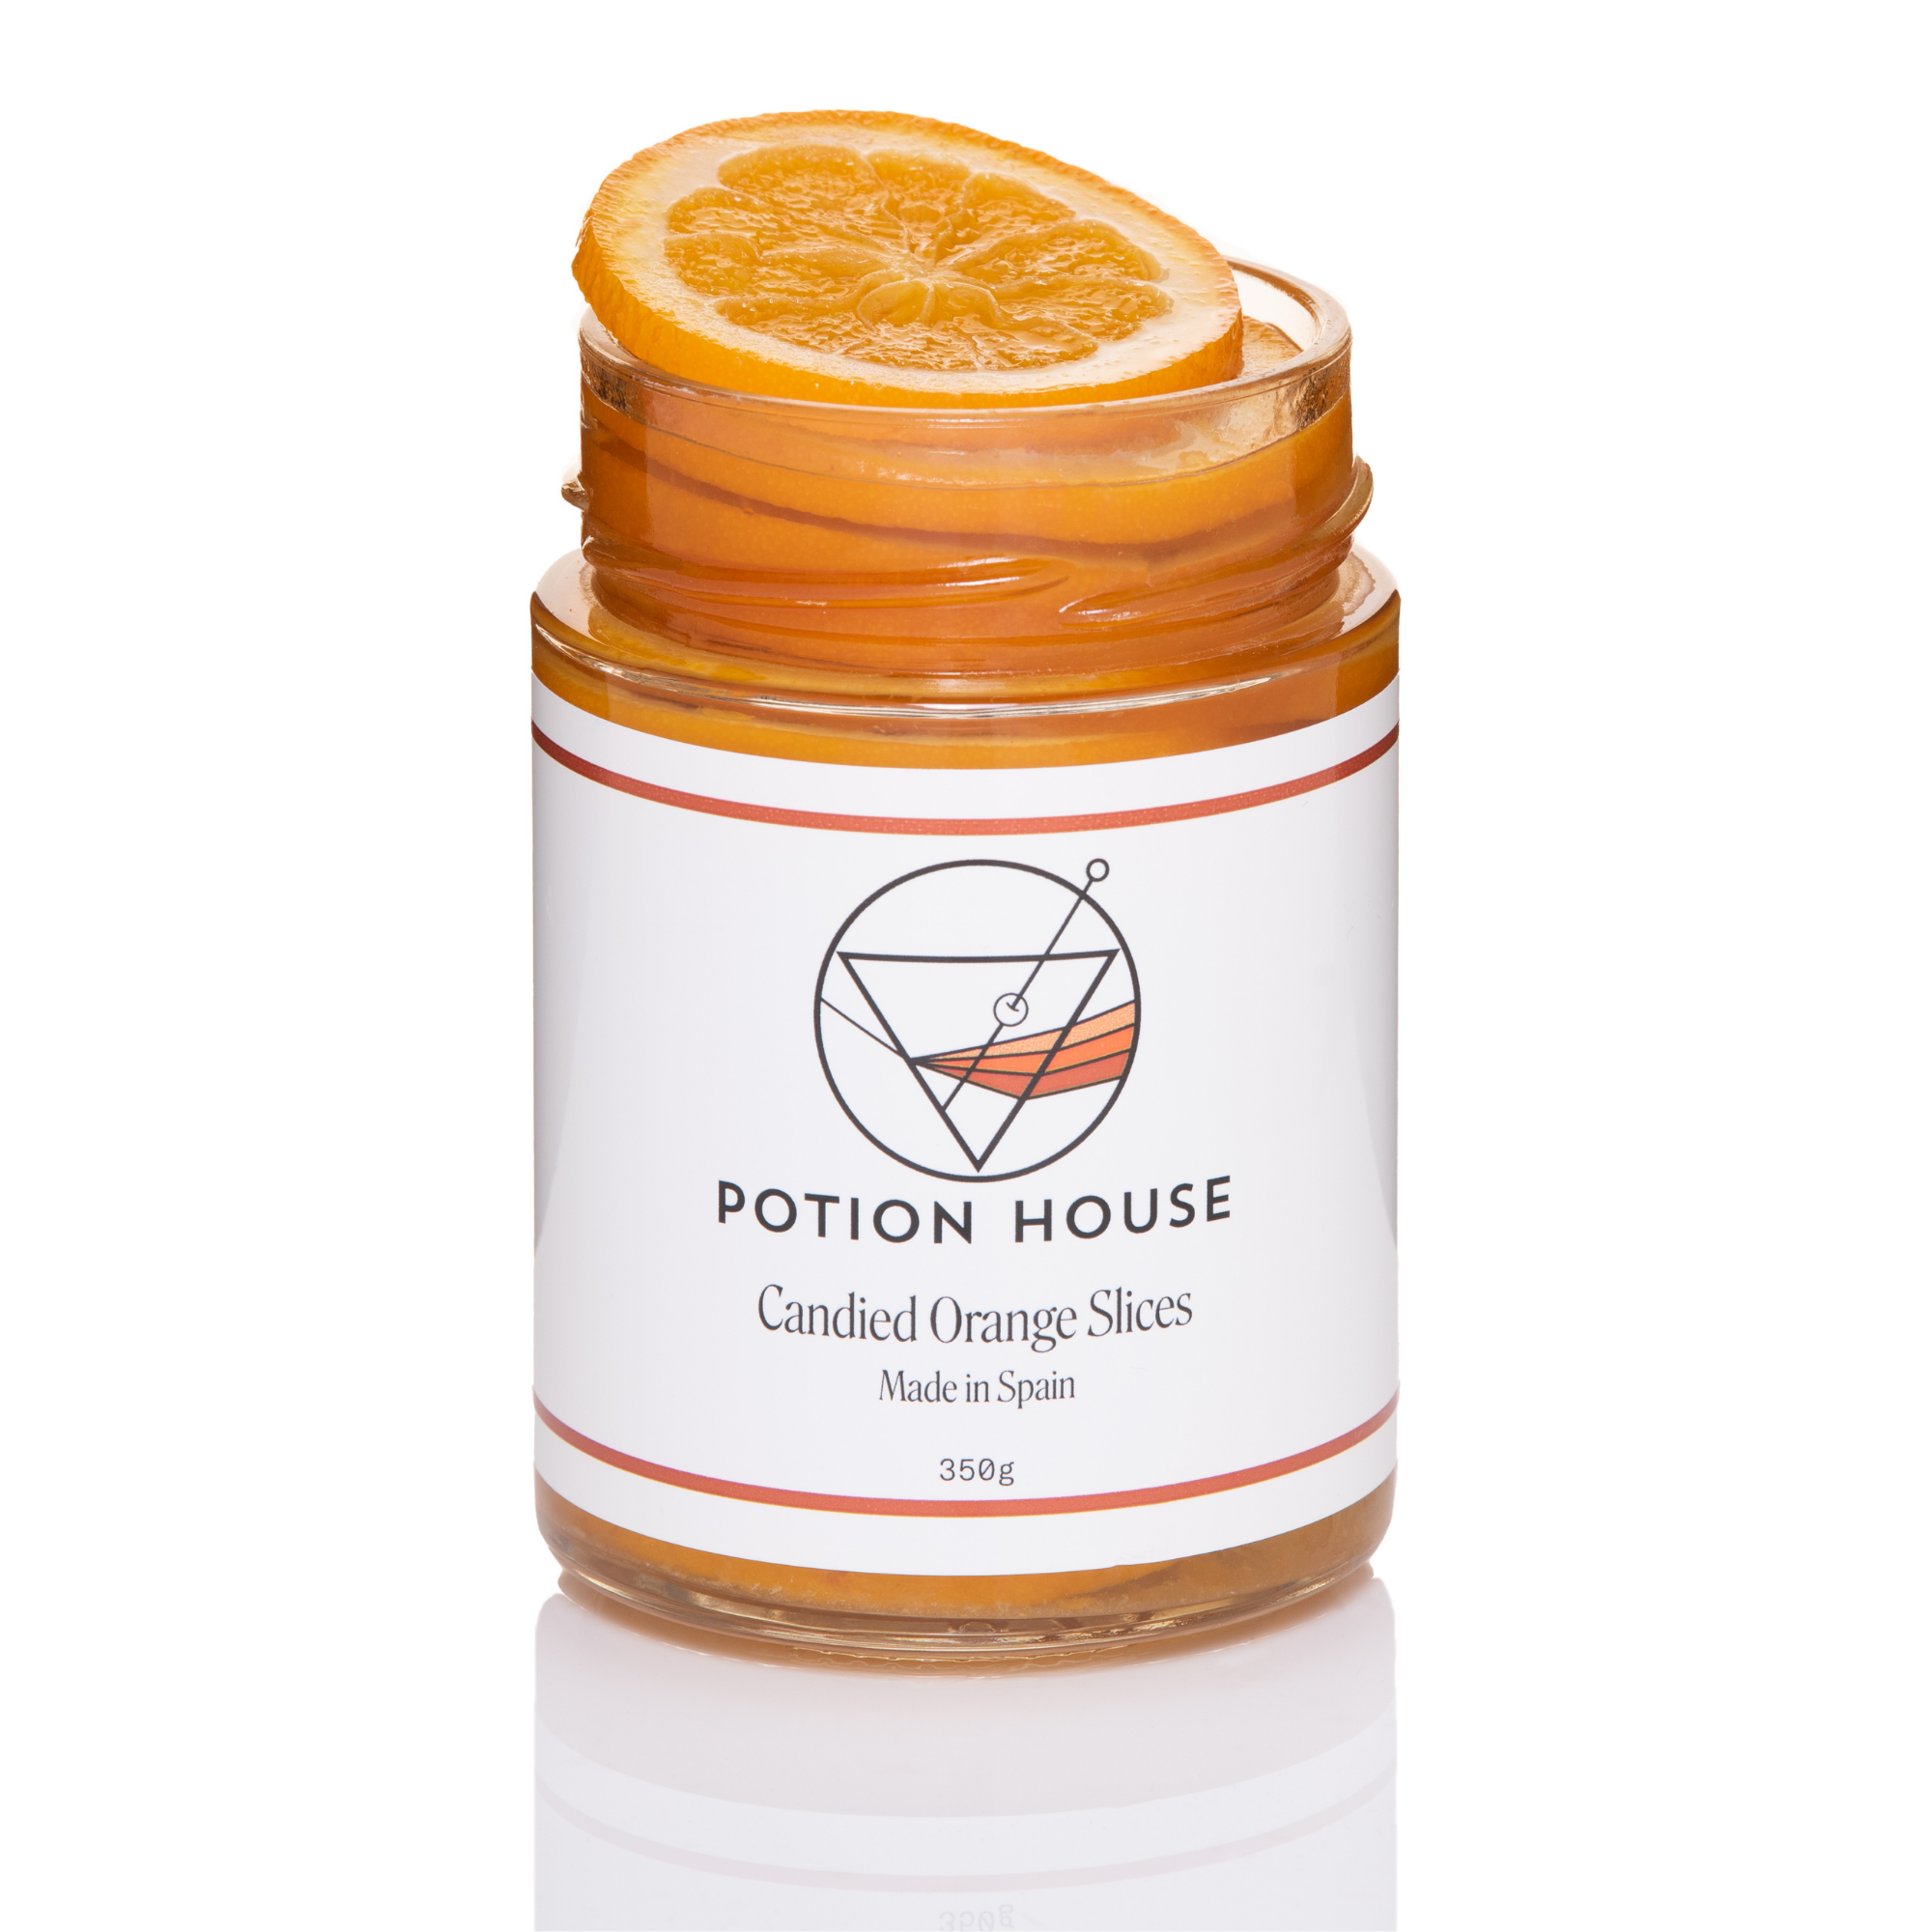 Potion House Candied Orange Slices